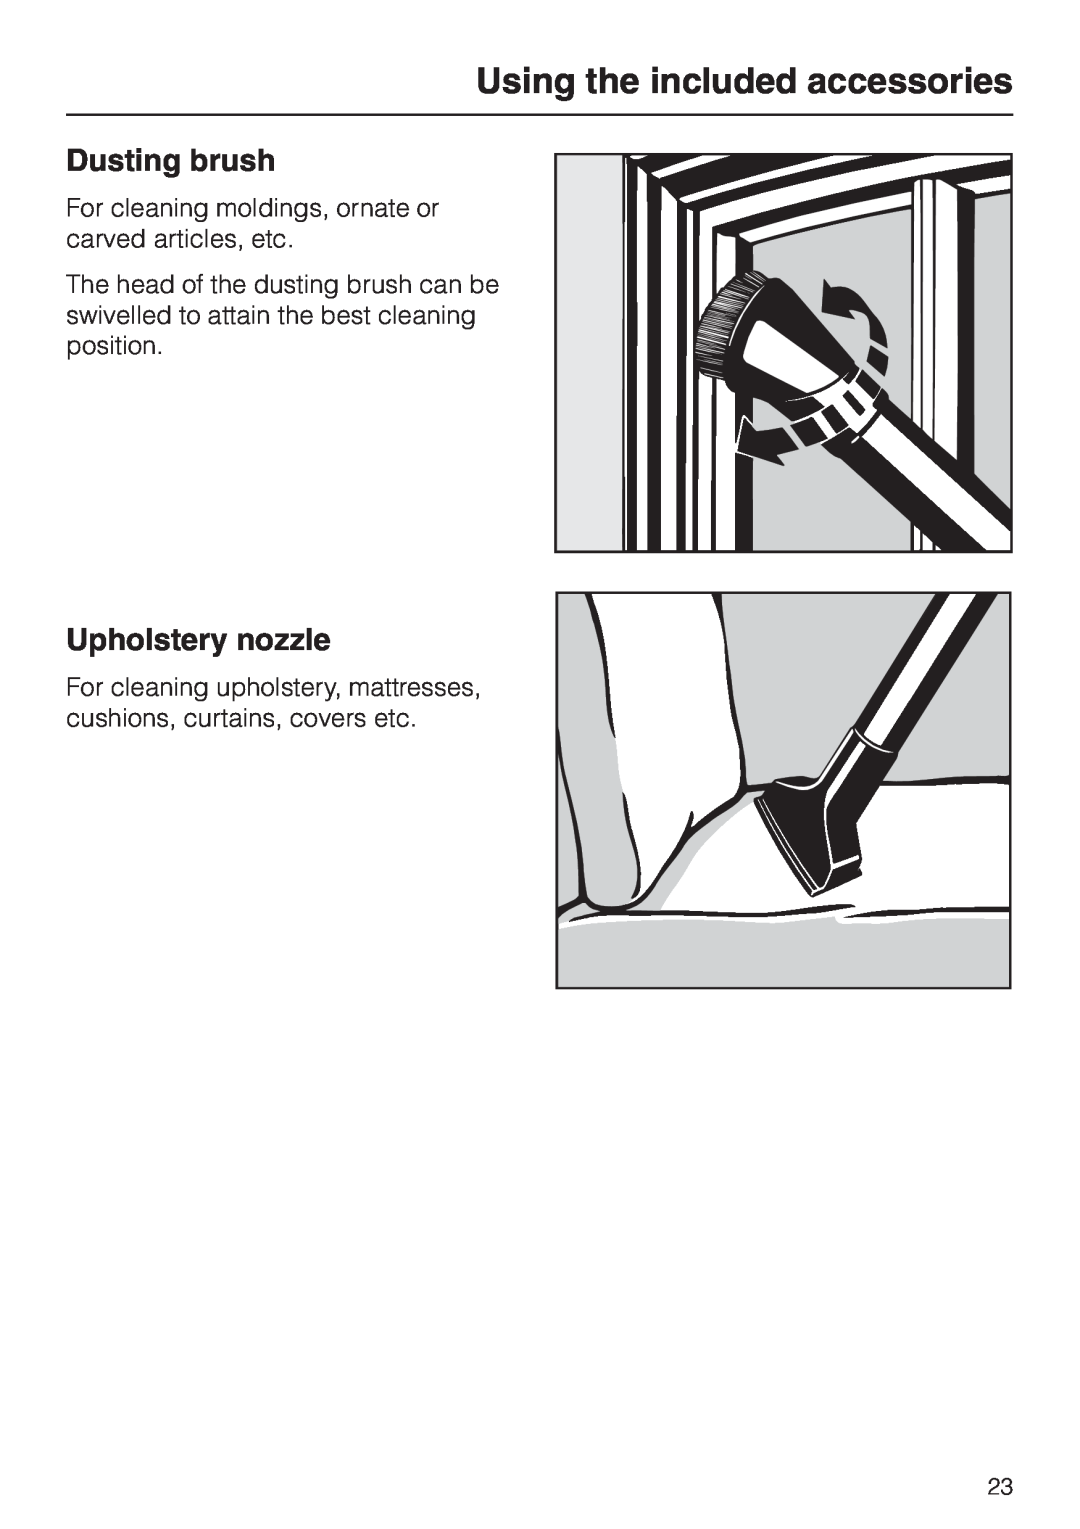 Miele S 658 manual Dusting brush, Upholstery nozzle, Using the included accessories 